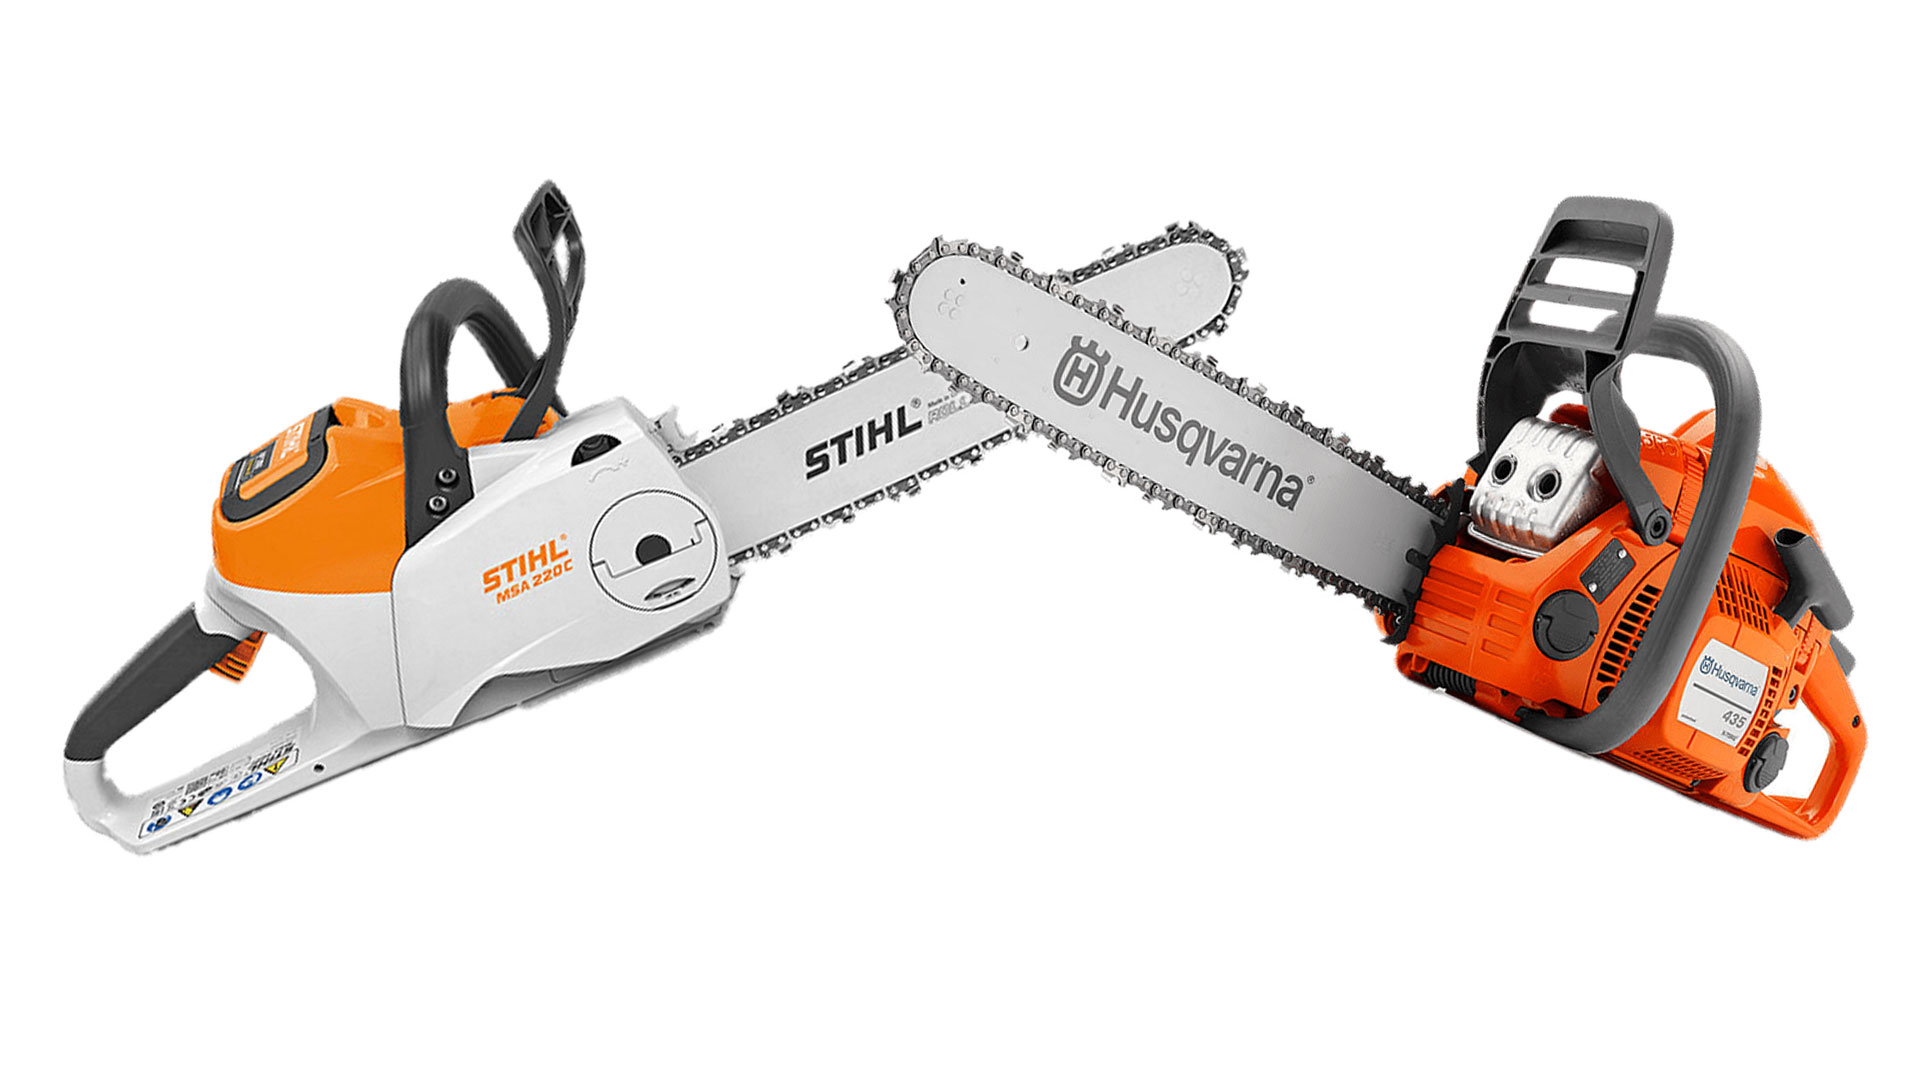 MS 180 - MS 180 petrol-driven chainsaw: compact entry-level model